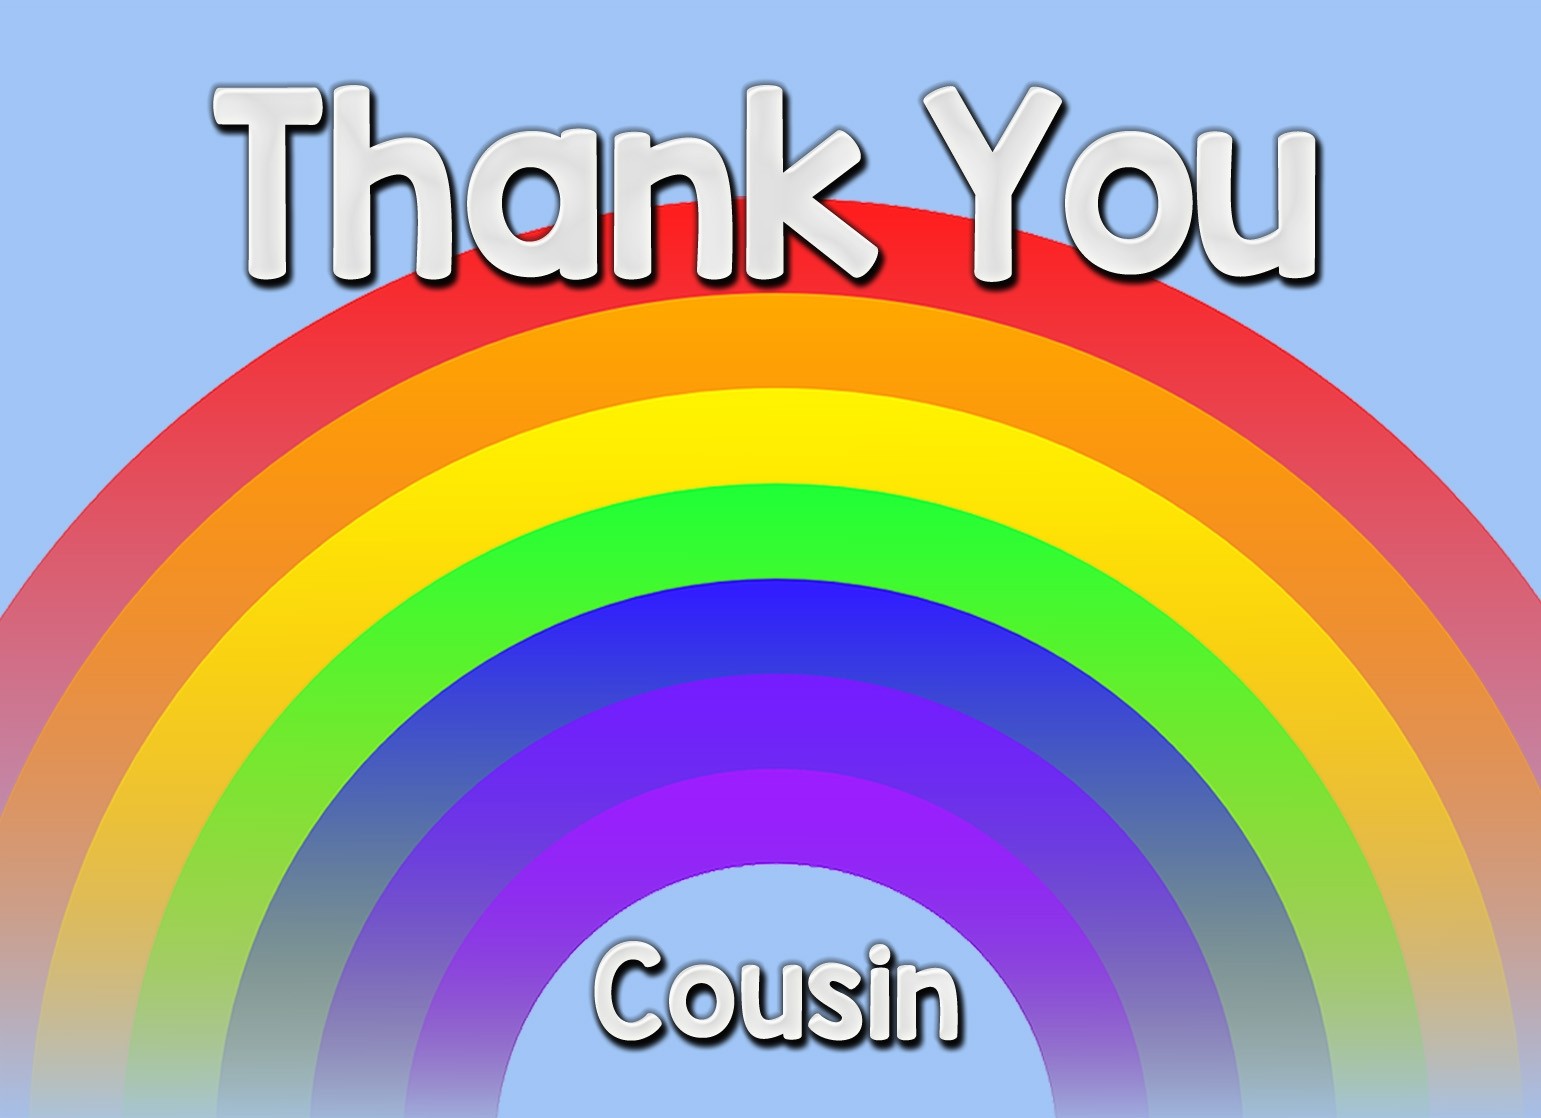 Thank You 'Cousin' Rainbow Greeting Card